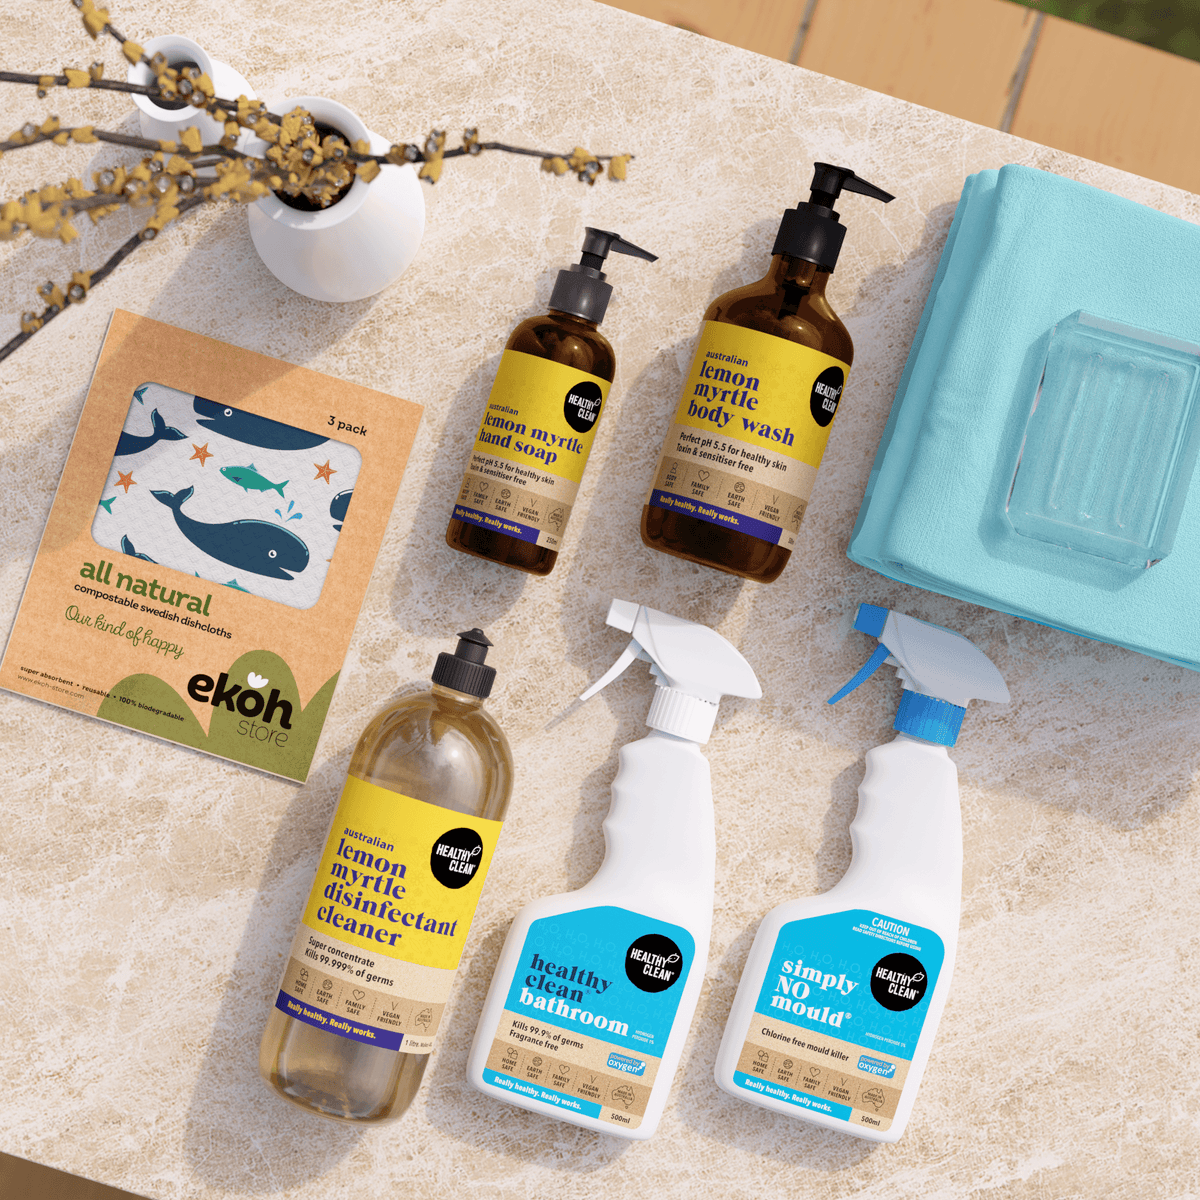 Spring Cleaning your home with natural cleaning products from EKOH